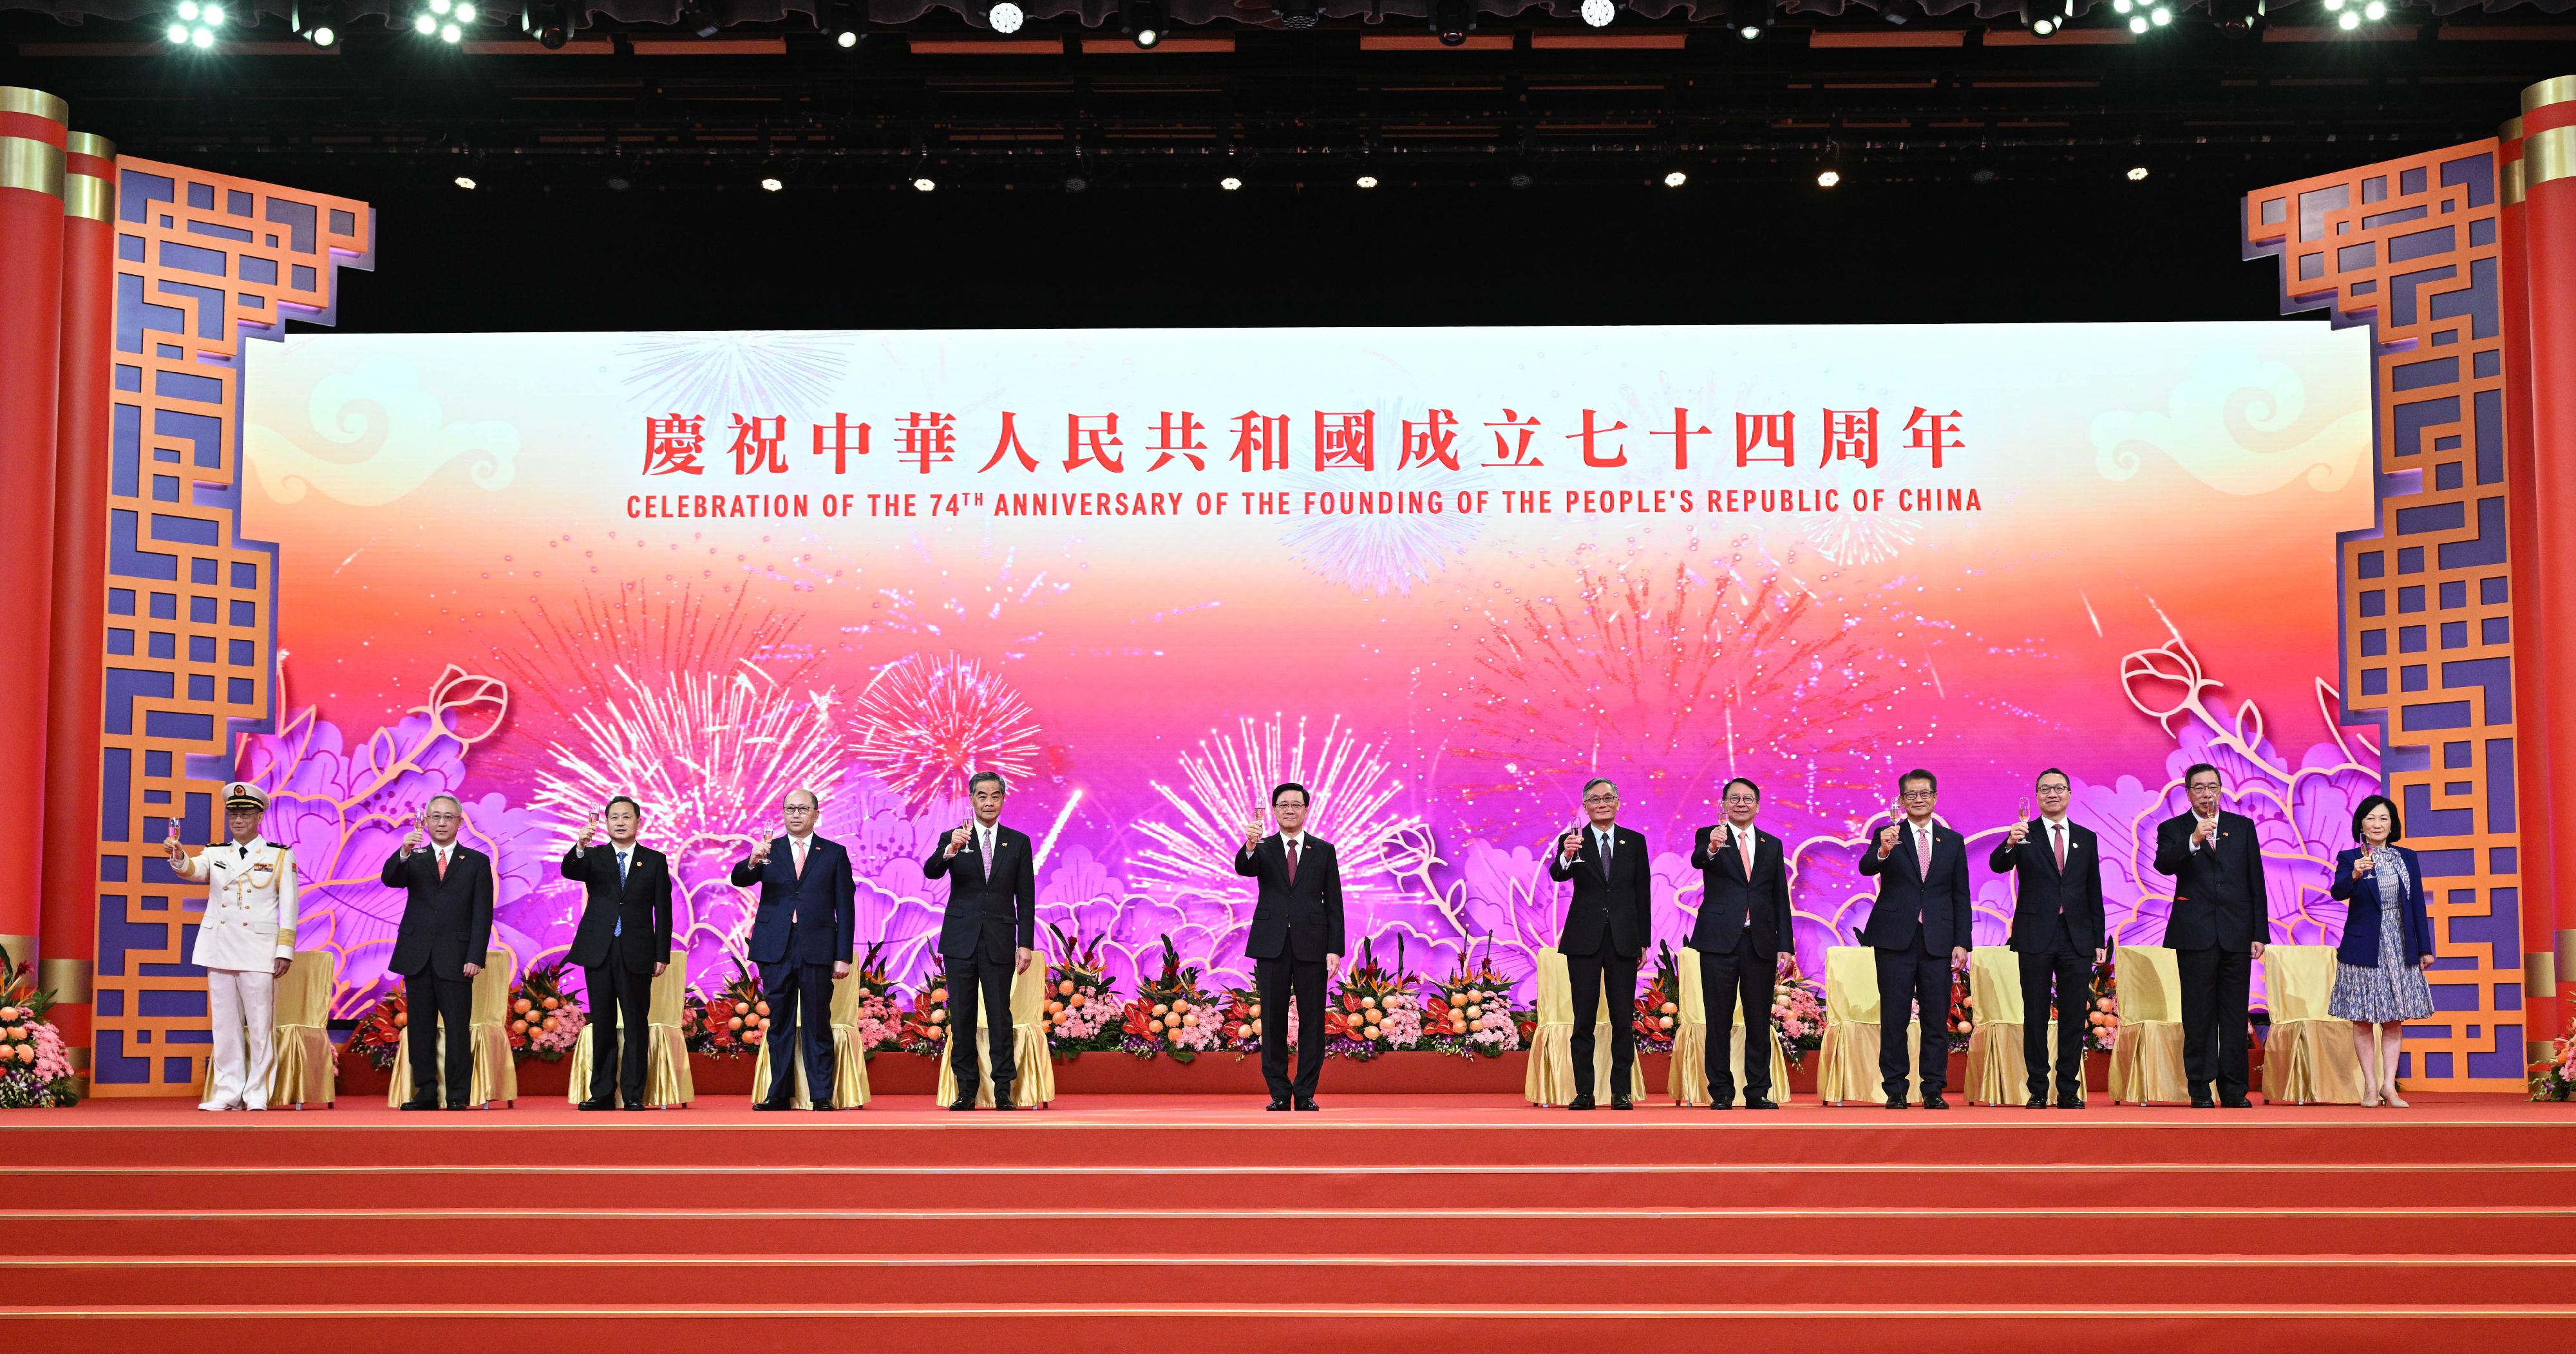 The Chief Executive, Mr John Lee, together with Principal Officials and guests, attended the reception for the 74th anniversary of the founding of the People's Republic of China at the Hong Kong Convention and Exhibition Centre this morning (October 1). Photo shows (from left) the Political Commissar of the Chinese People's Liberation Army Hong Kong Garrison, Navy Rear Admiral Lai Ruxin; the Acting Commissioner of the Office of the Commissioner of the Ministry of Foreign Affairs of the People's Republic of China in the HKSAR, Mr Li Yongsheng; the Head of the Office for Safeguarding National Security of the Central People's Government in the HKSAR, Mr Dong Jingwei; the Director of the Liaison Office of the Central People's Government in the HKSAR, Mr Zheng Yanxiong; Vice-Chairman of the National Committee of the Chinese People's Political Consultative Conference Mr C Y Leung; Mr Lee; the Chief Justice of the Court of Final Appeal, Mr Andrew Cheung Kui-nung; the Chief Secretary for Administration, Mr Chan Kwok-ki; the Financial Secretary, Mr Paul Chan; the Secretary for Justice, Mr Paul Lam, SC; the President of the Legislative Council, Mr Andrew Leung; and the Convenor of the Non-official Members of the Executive Council, Mrs Regina Ip, proposing a toast.